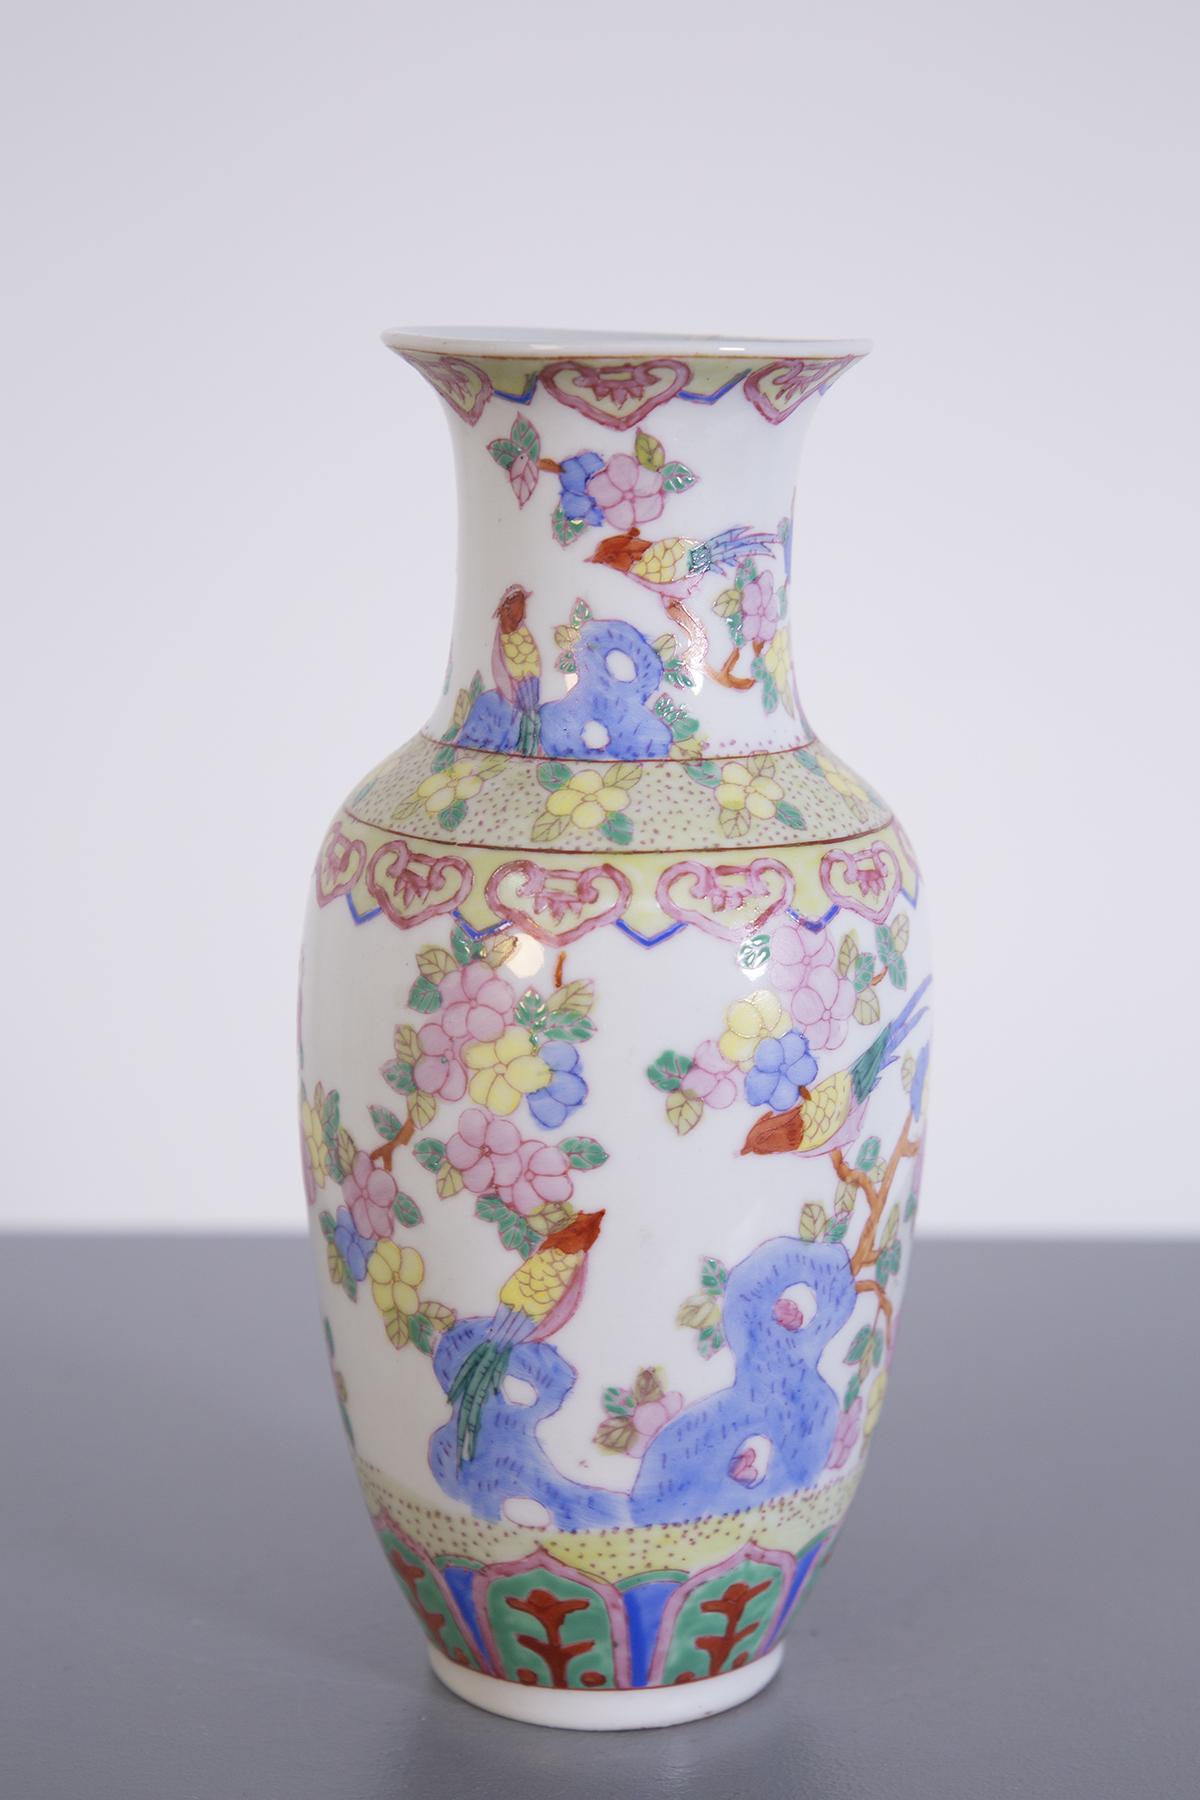 Vintage Chinese porcelain ornamental oriental vase dating from the early 1900s.
The vase is entirely hand painted, depicting flowers and birds.
The vintage Chinese porcelain vase has a sinuous shape, which sees a narrower base with a more domed